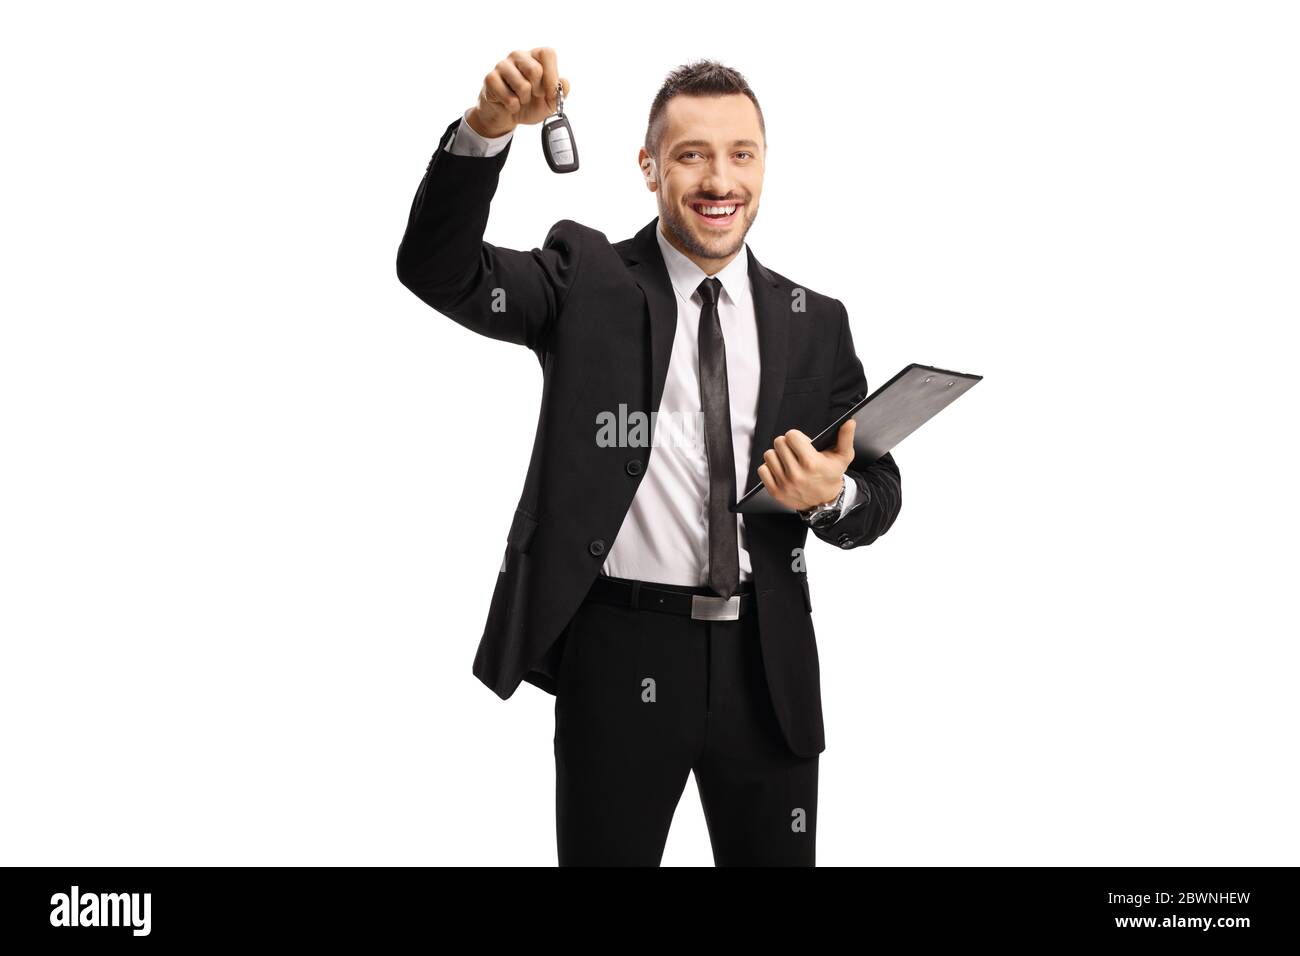 Smiling man in a suit showing a car key isolated on white background Stock Photo